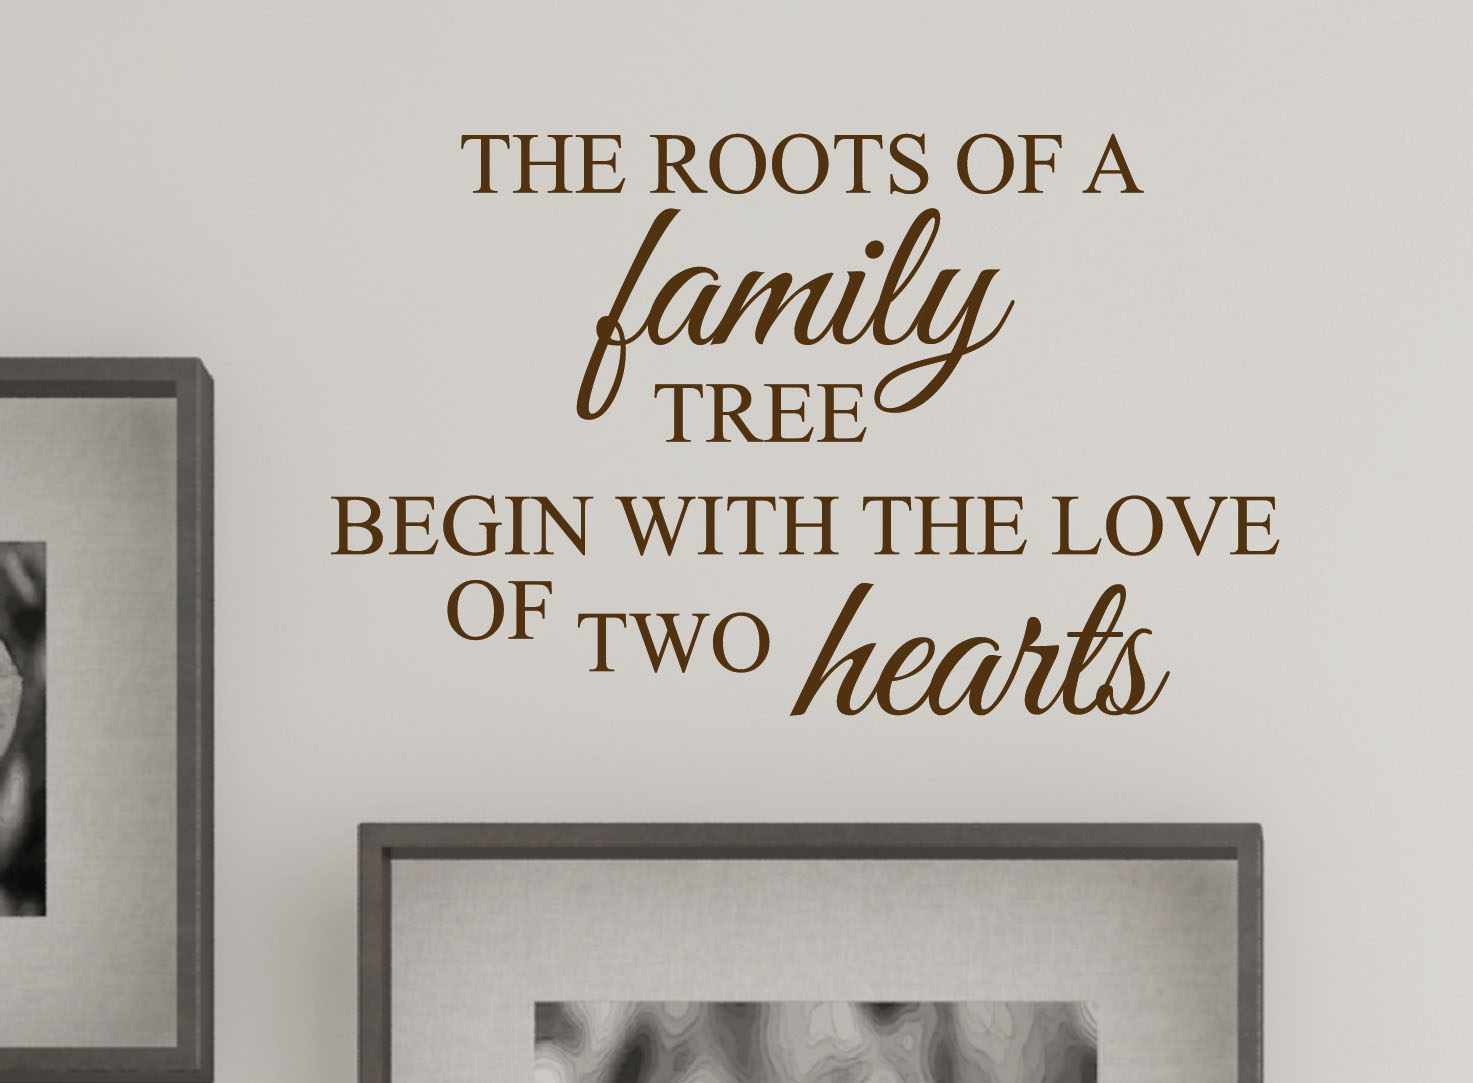 roots-of-a-family-tree-love-wall-decal-quote-picture-frames-brown.jpg